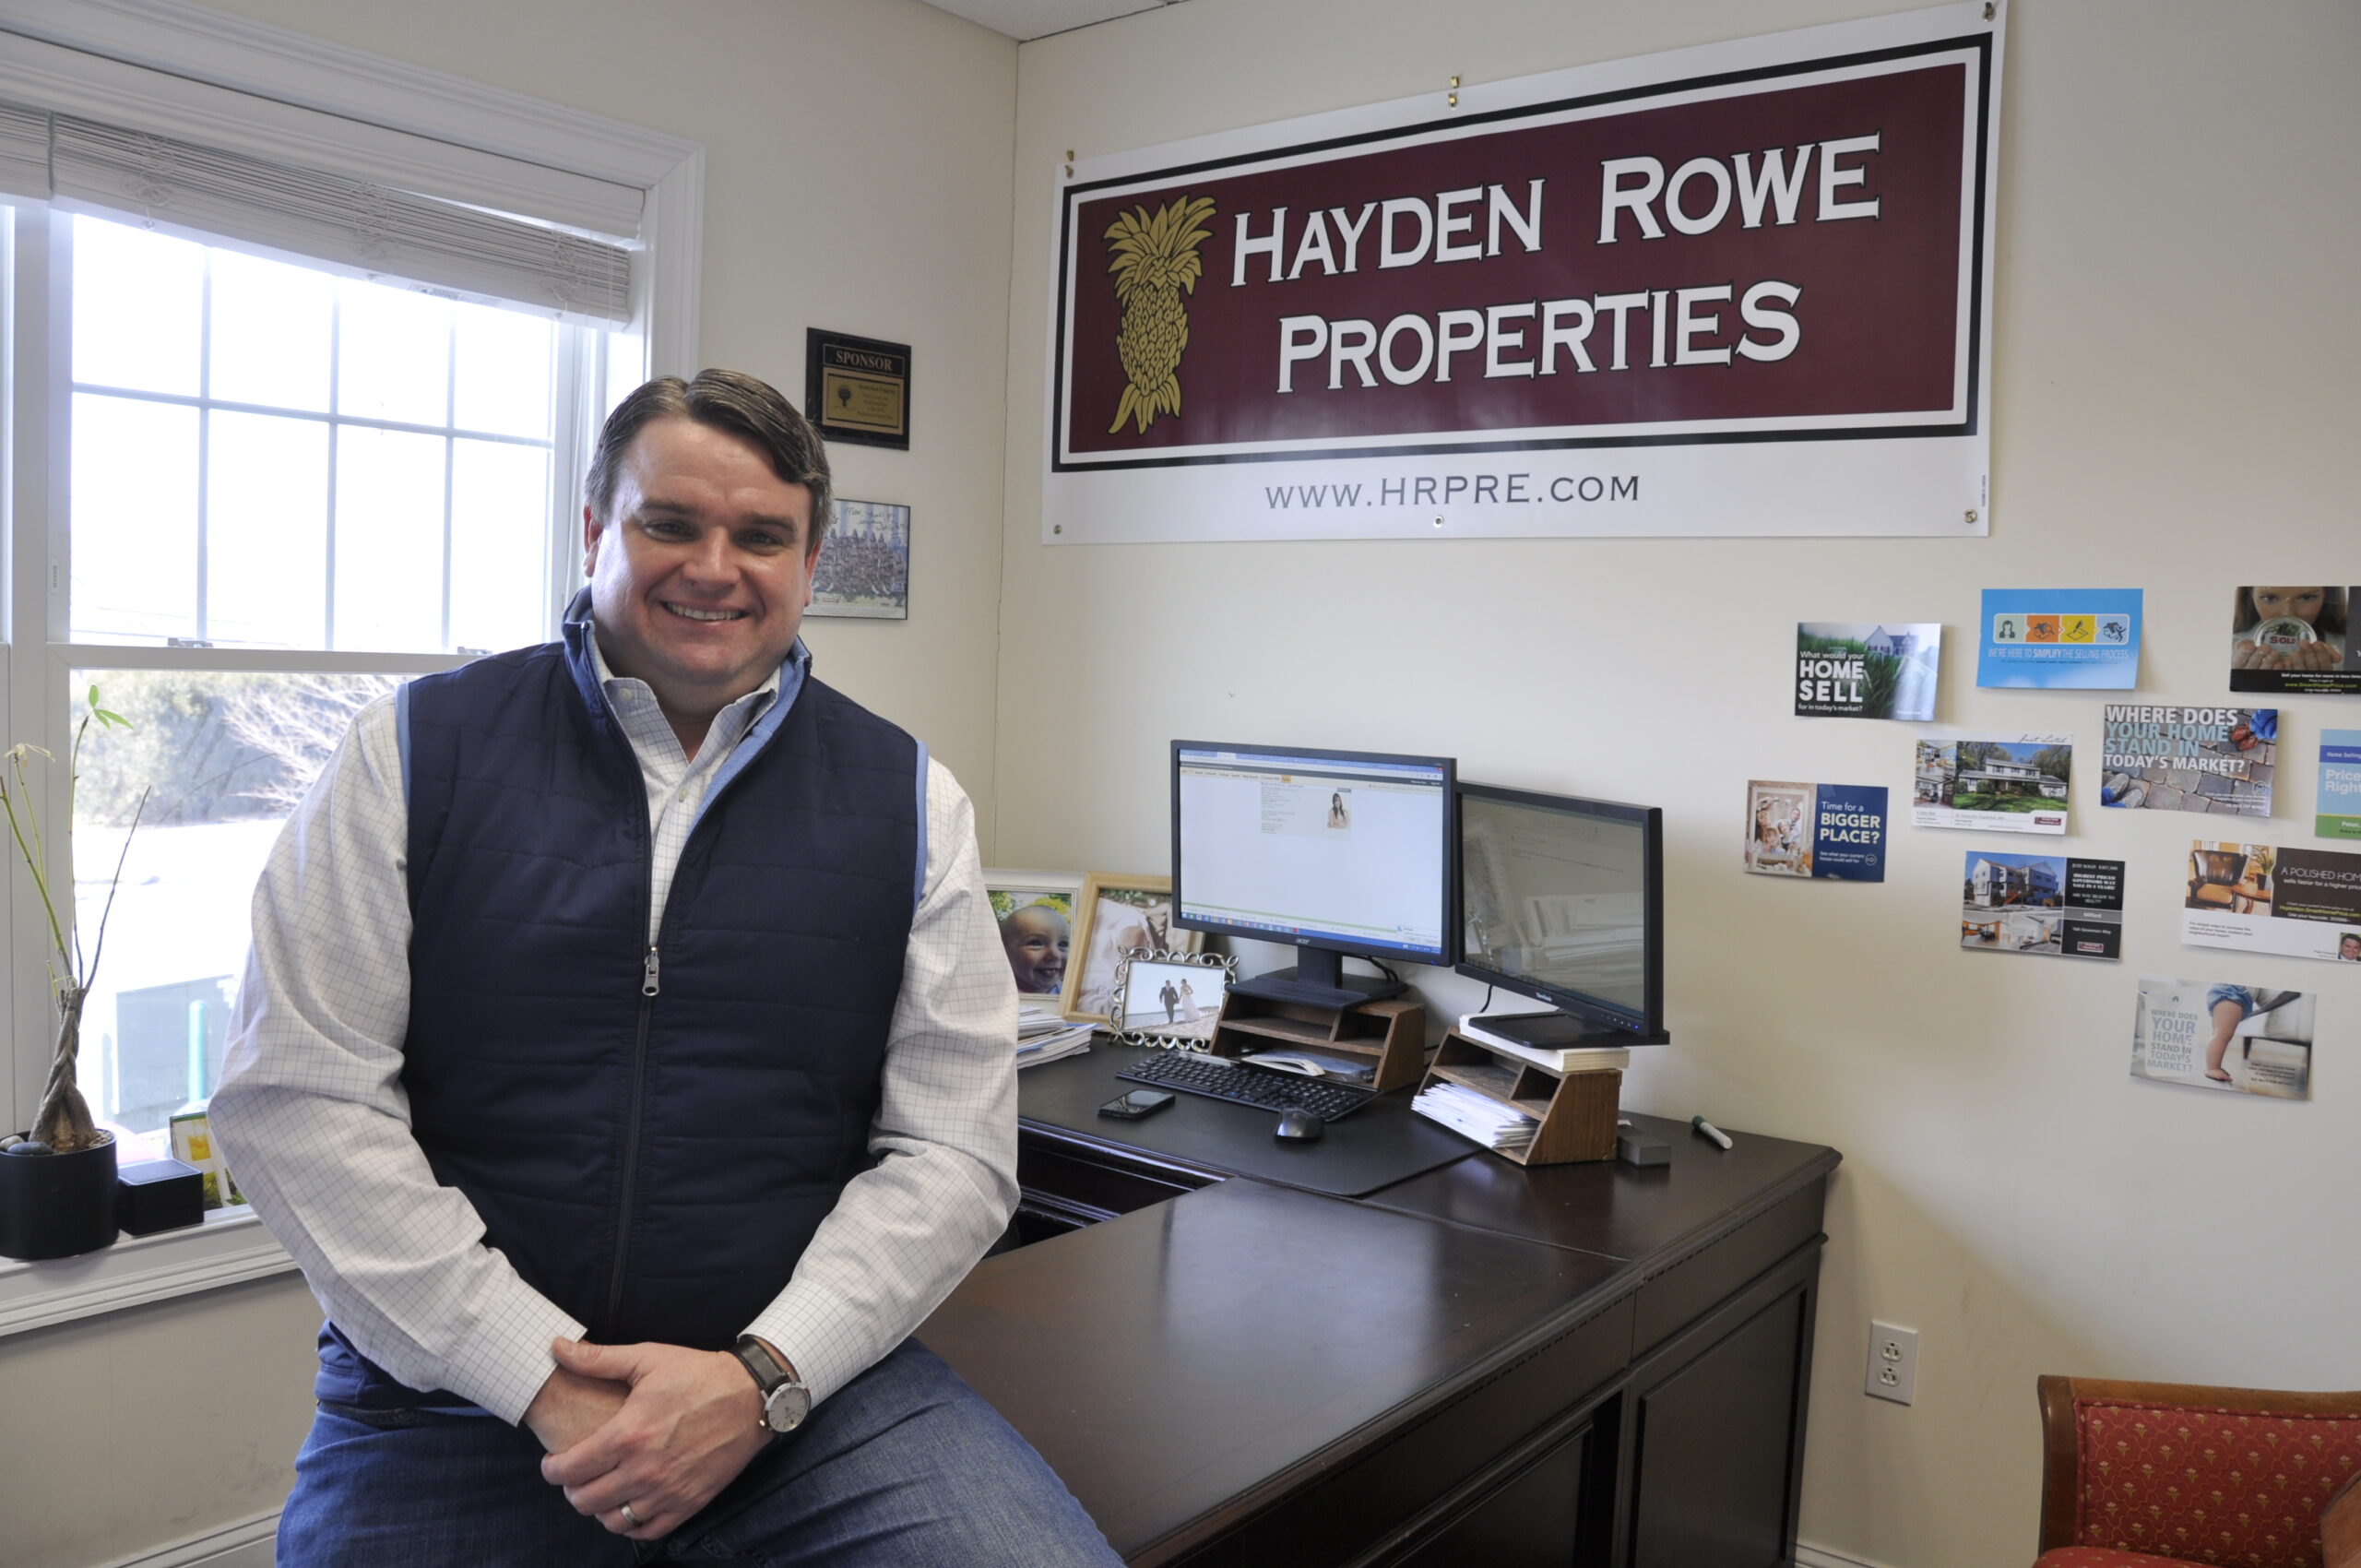 Business Profile: Hayden Rowe Properties, where every client, transaction matters